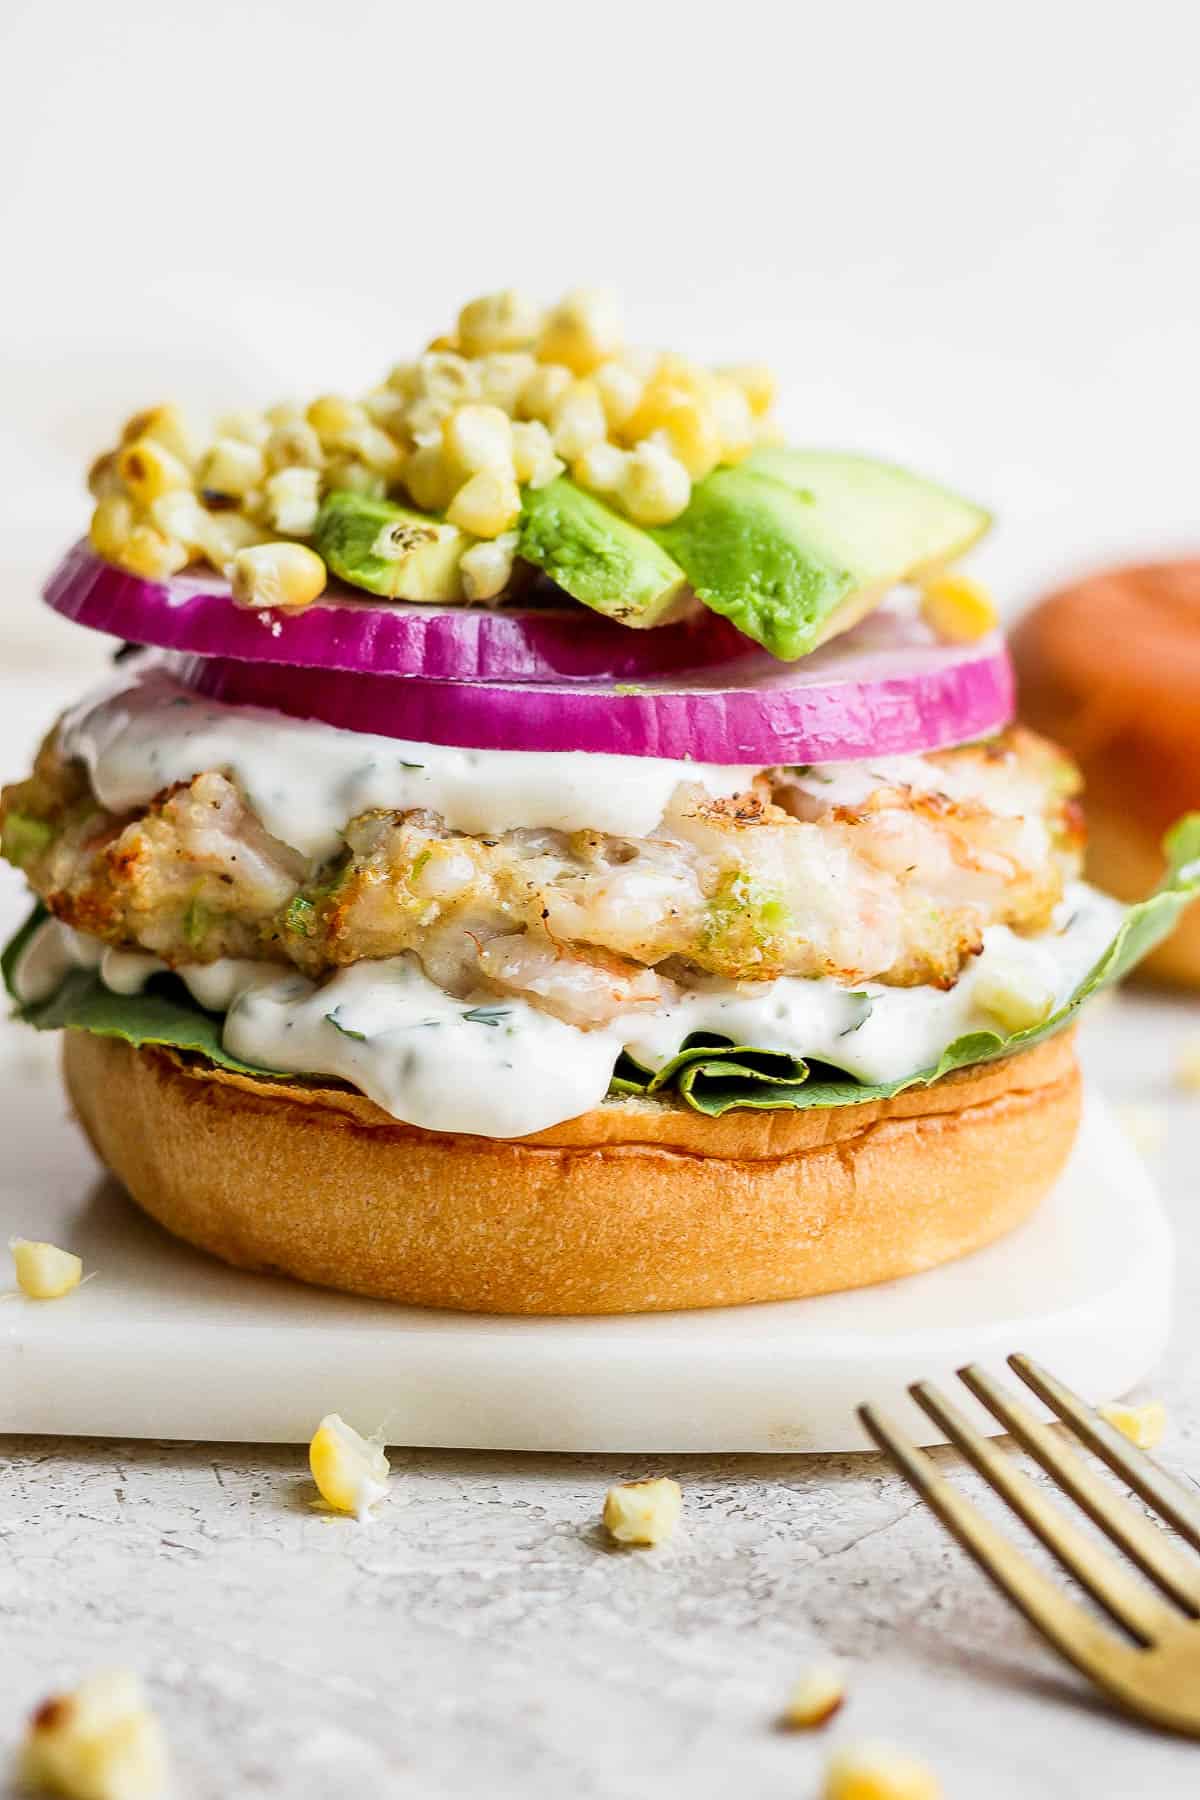 A shrimp burger with toppings being added.